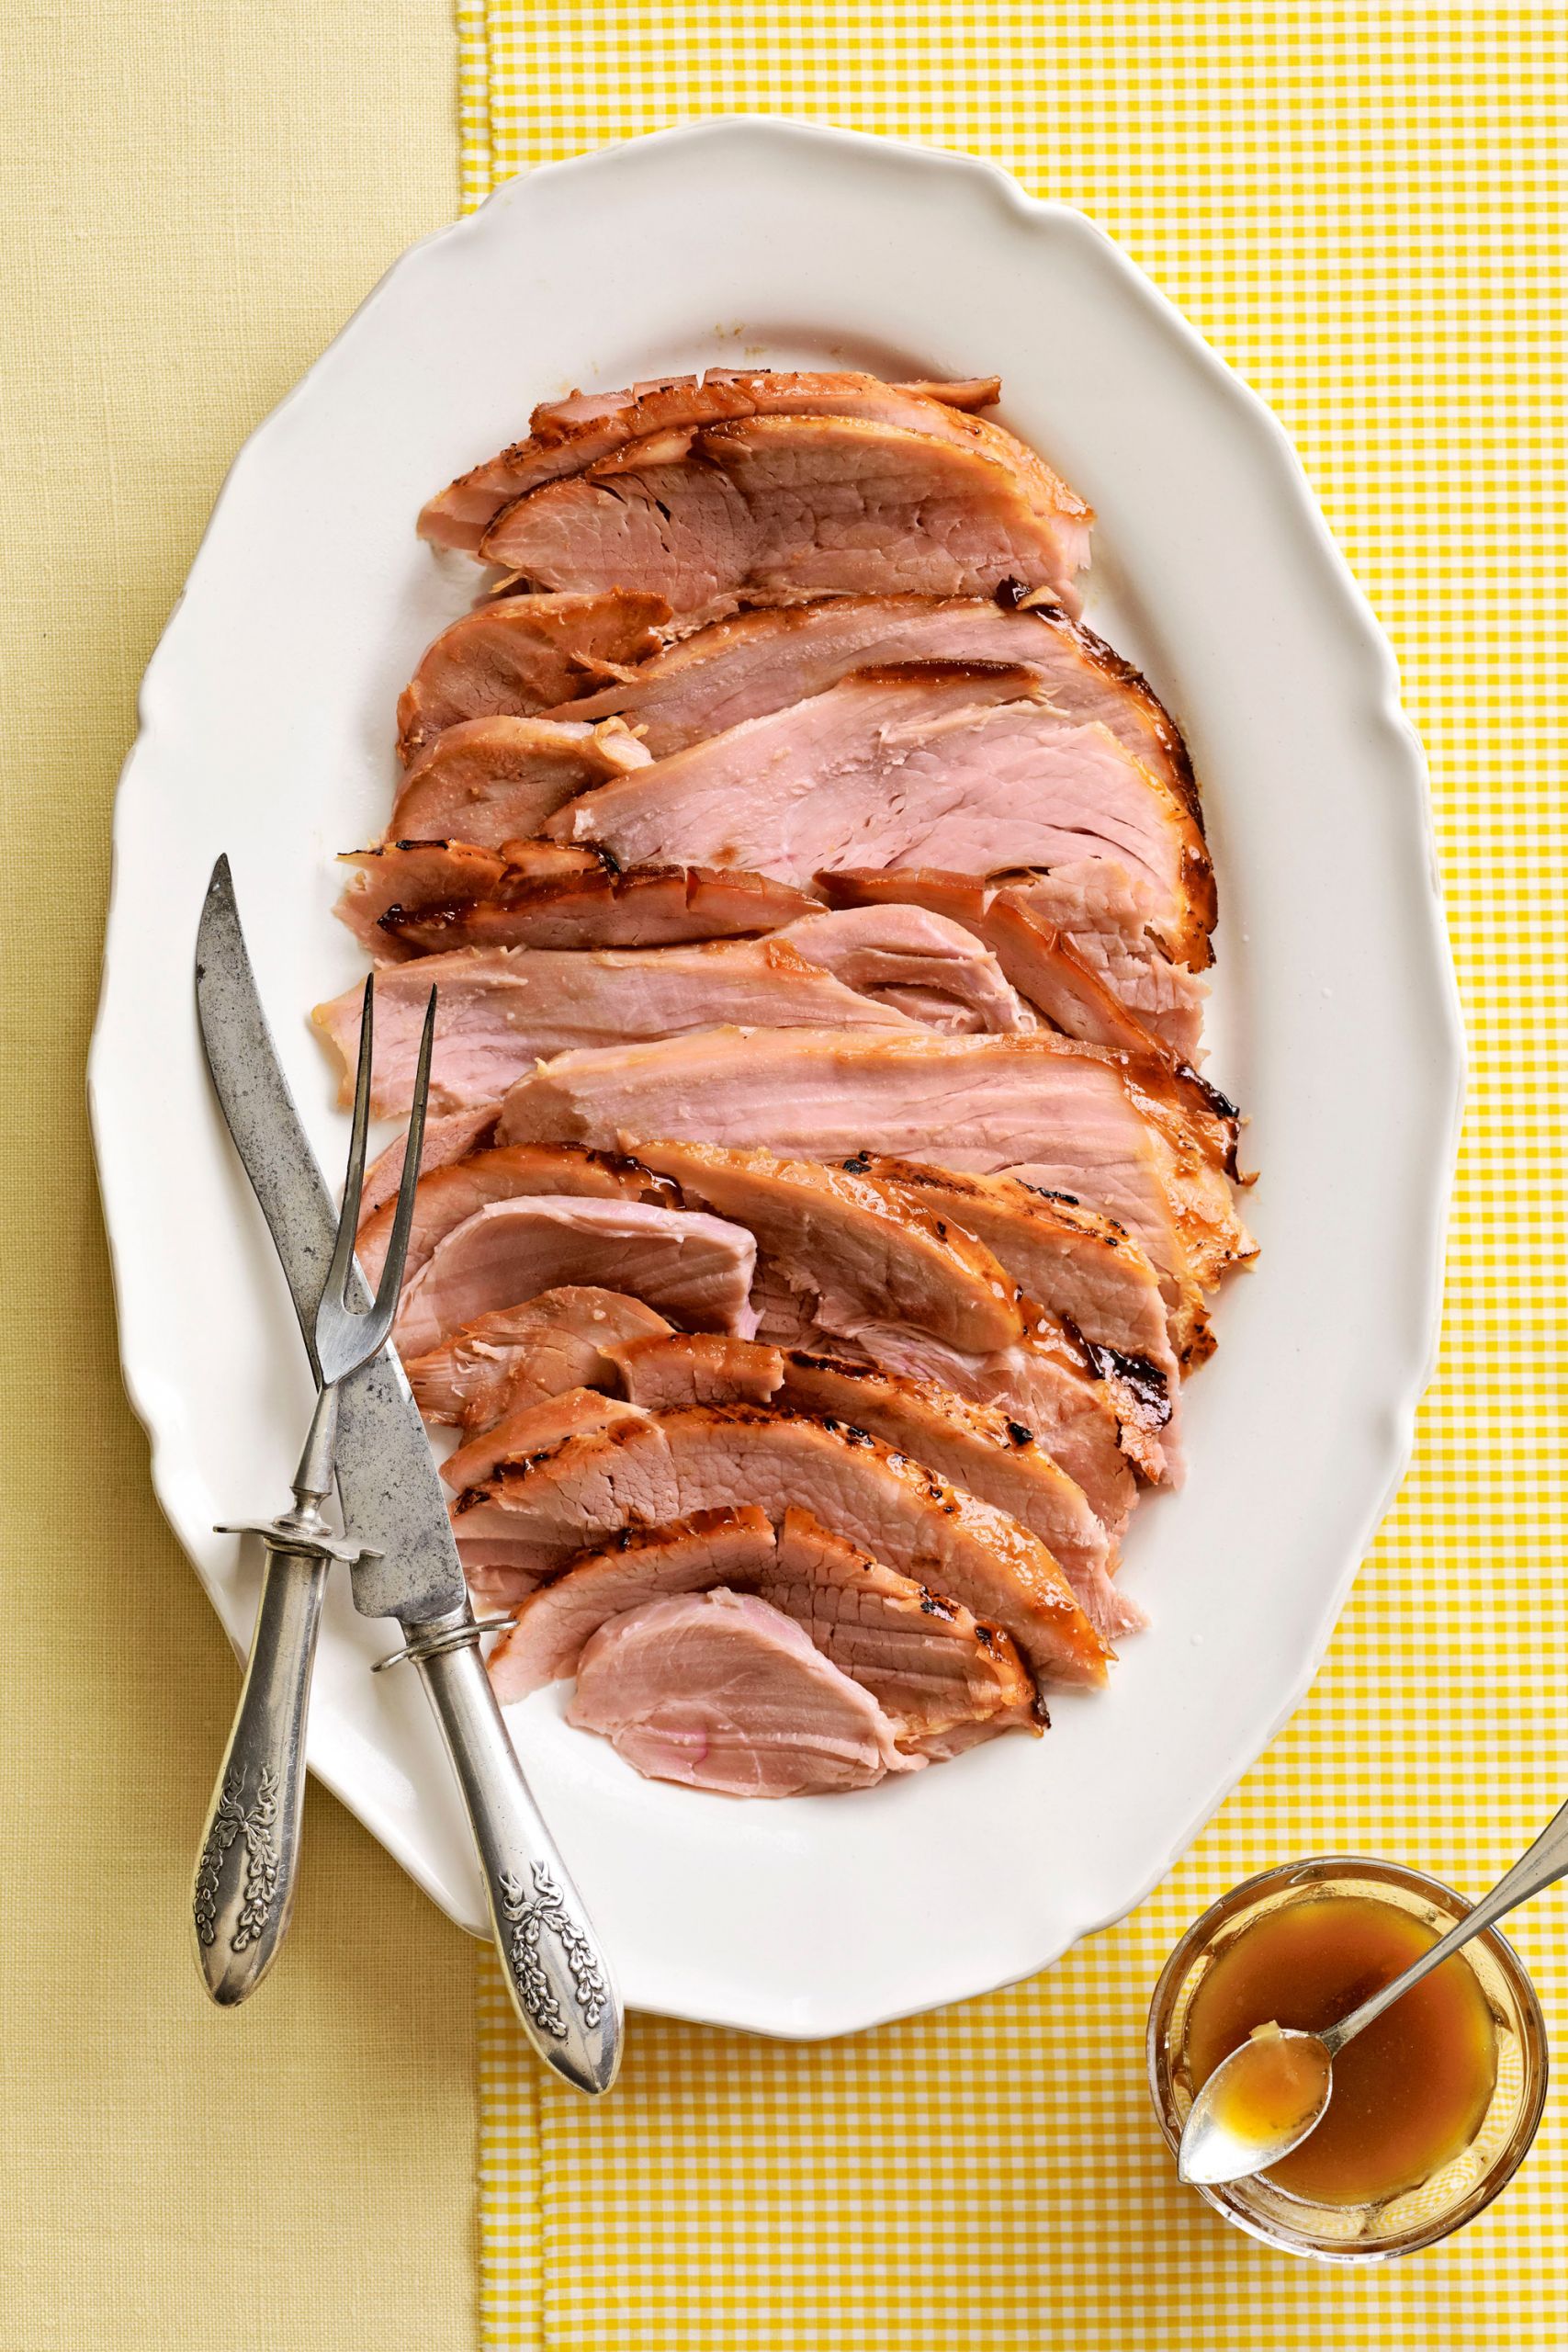 Recipes For Easter Ham
 11 Best Easter Ham Recipes How to Make an Easter Ham